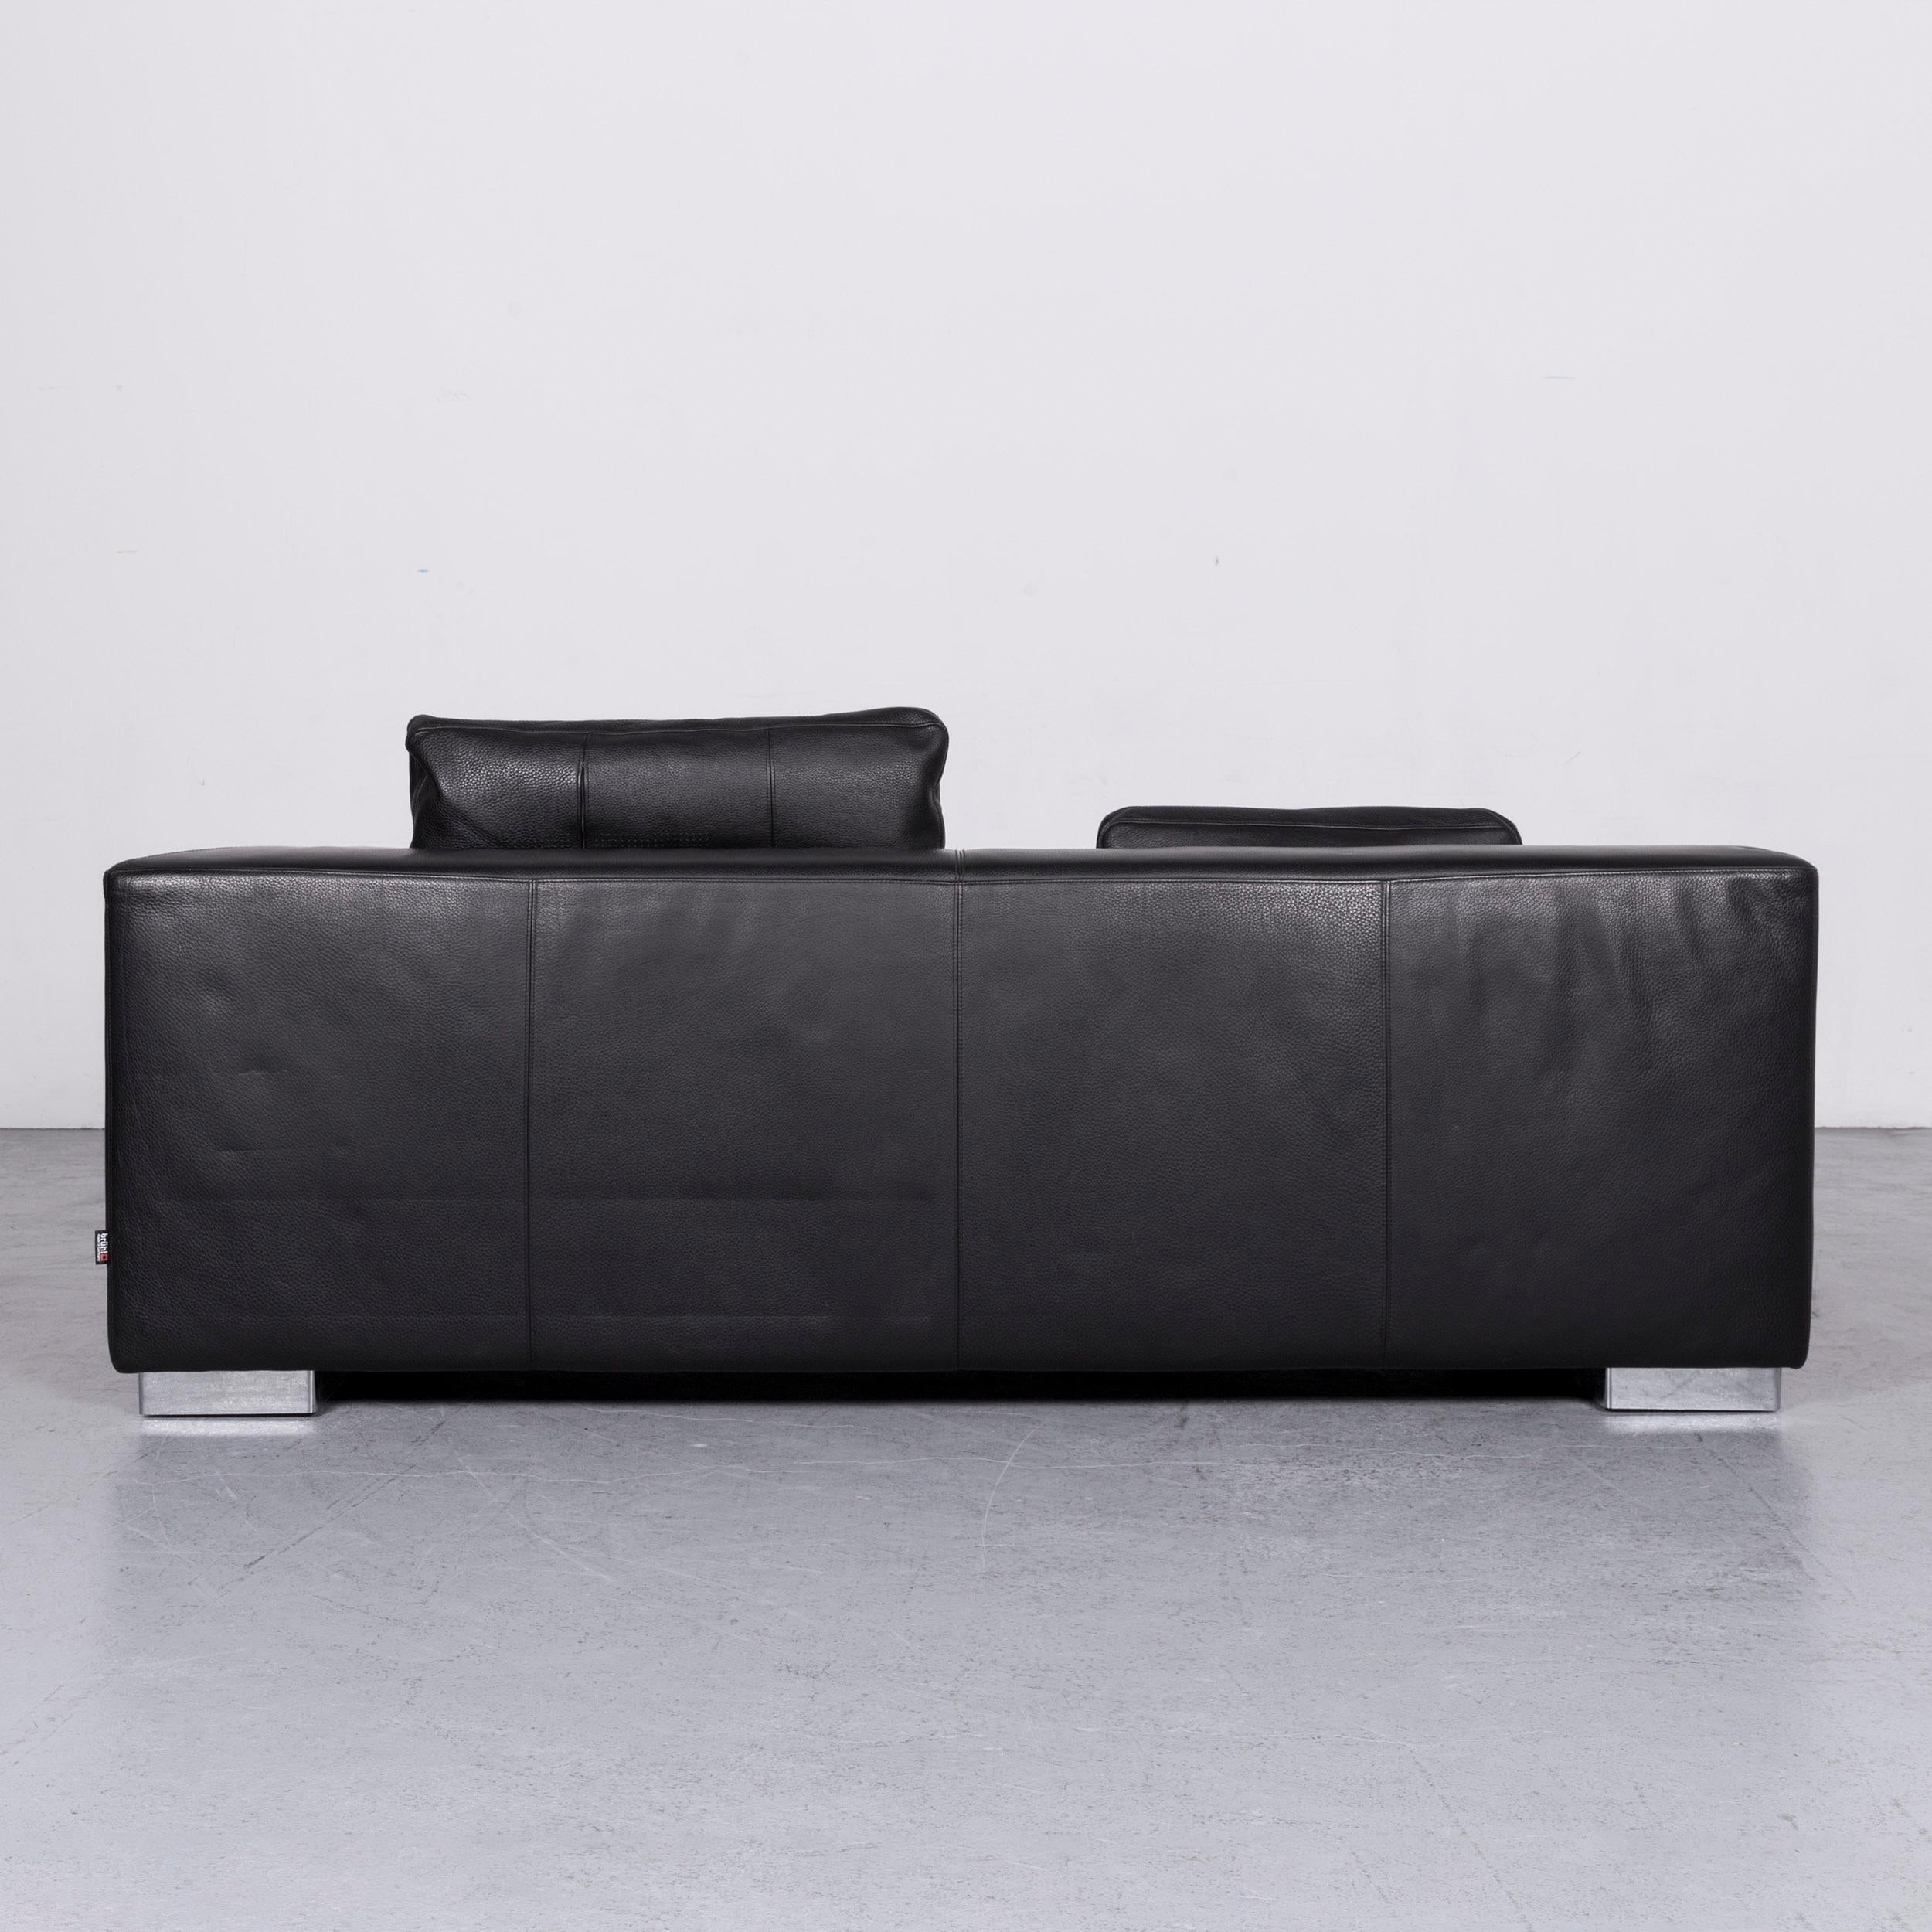 Brühl & Sippold Designer Sofa Set Leather Black Two-Seat Couch Modern For Sale 15